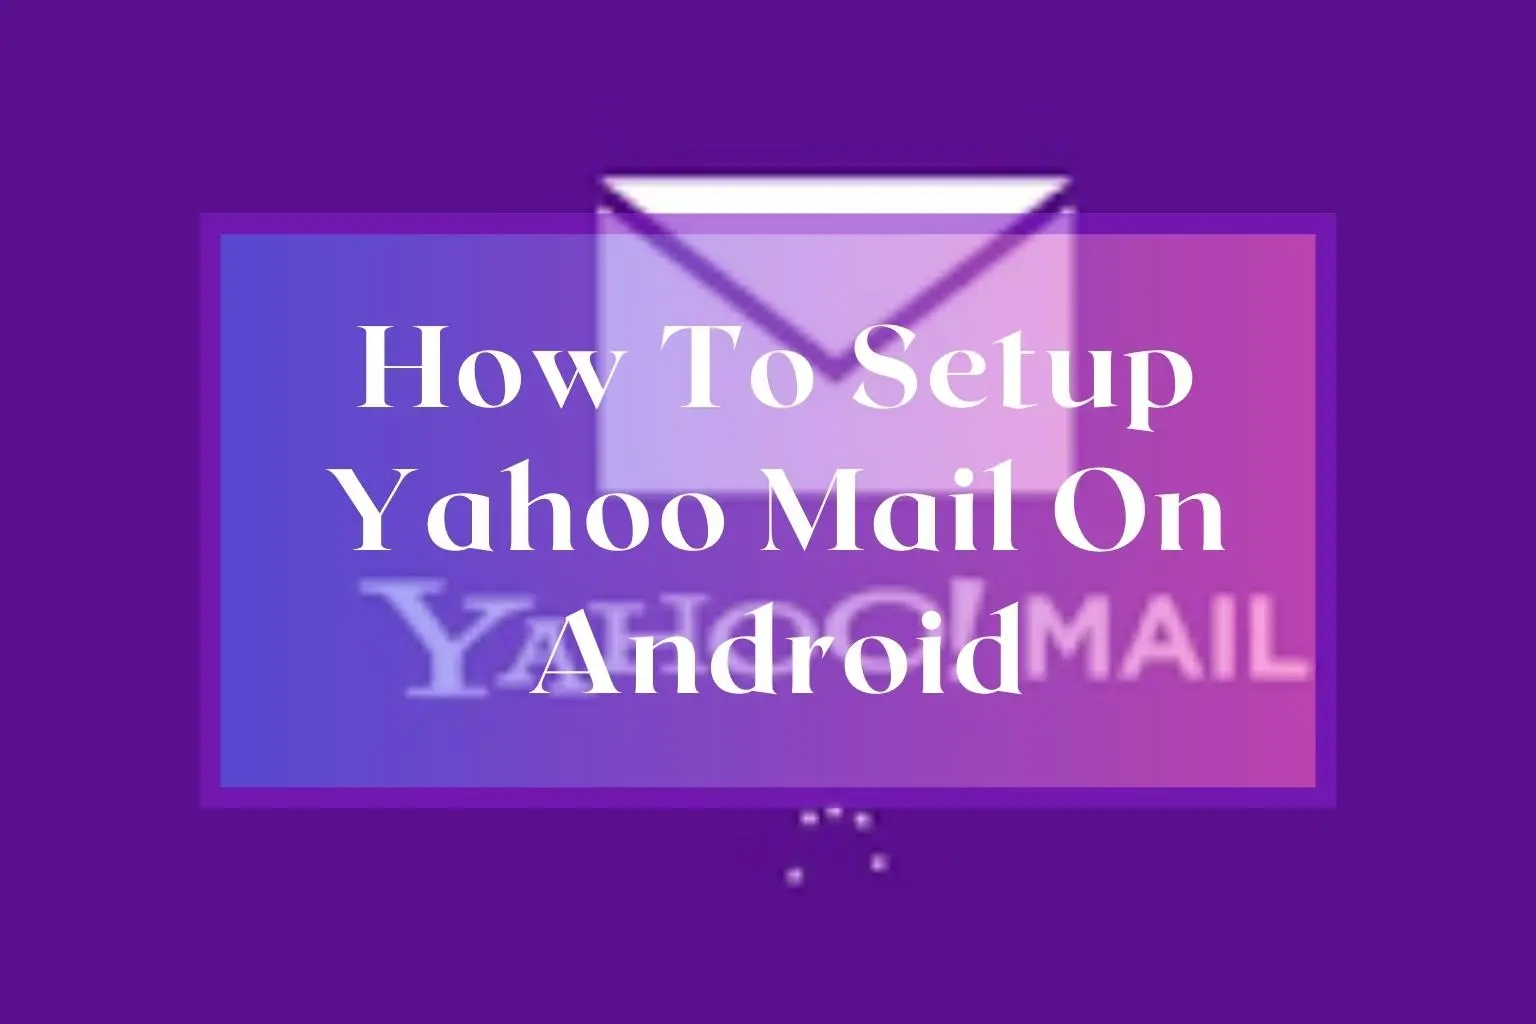 How To Setup Yahoo Mail On Android